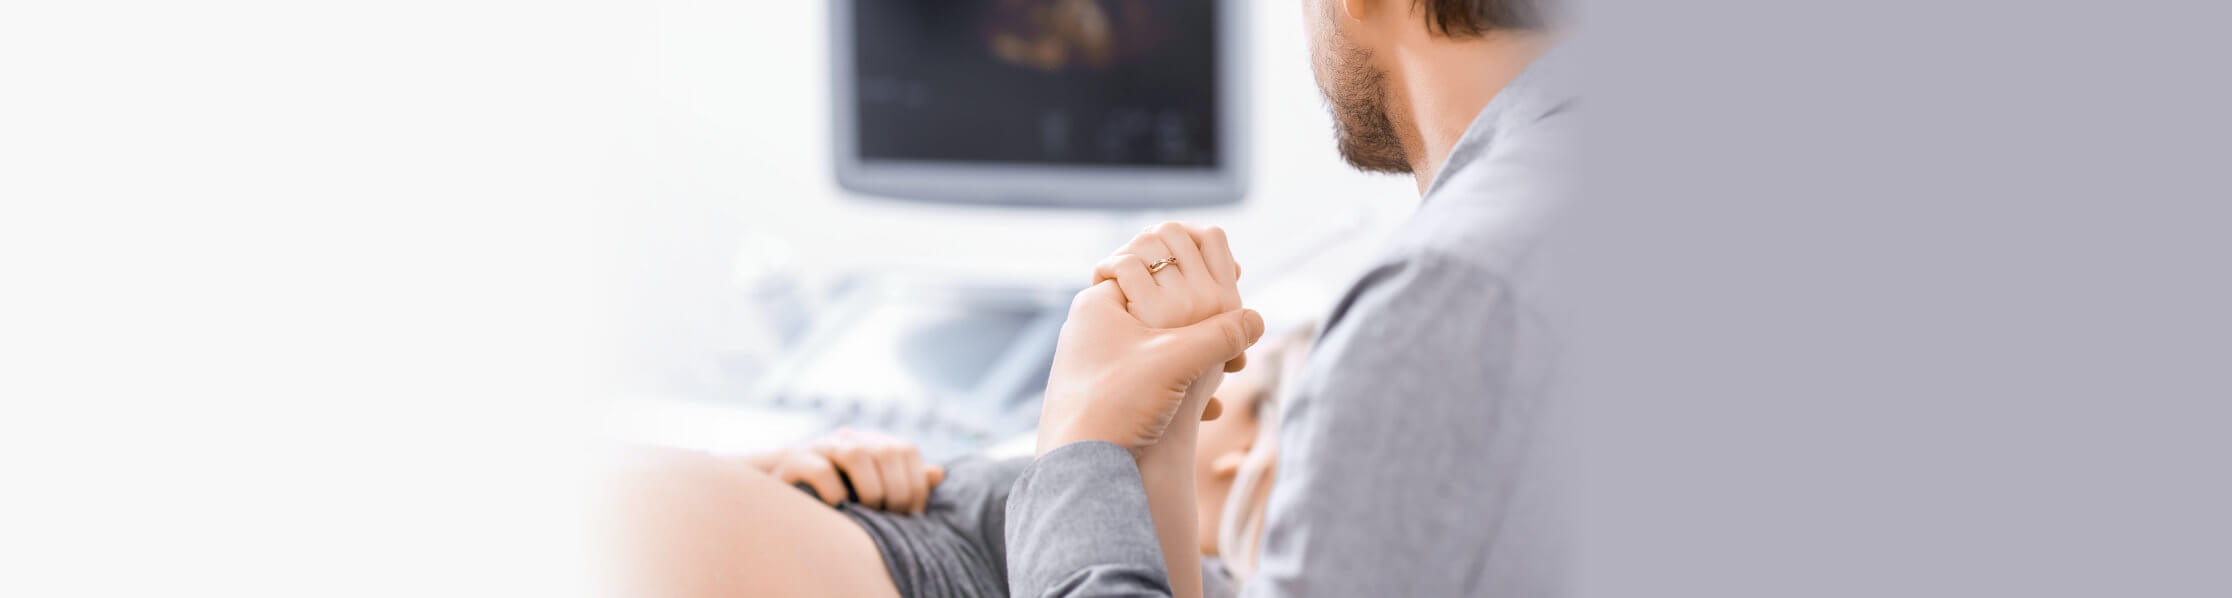 woman laying on hospital bed with ultrasound monitor in background with man holding her hand